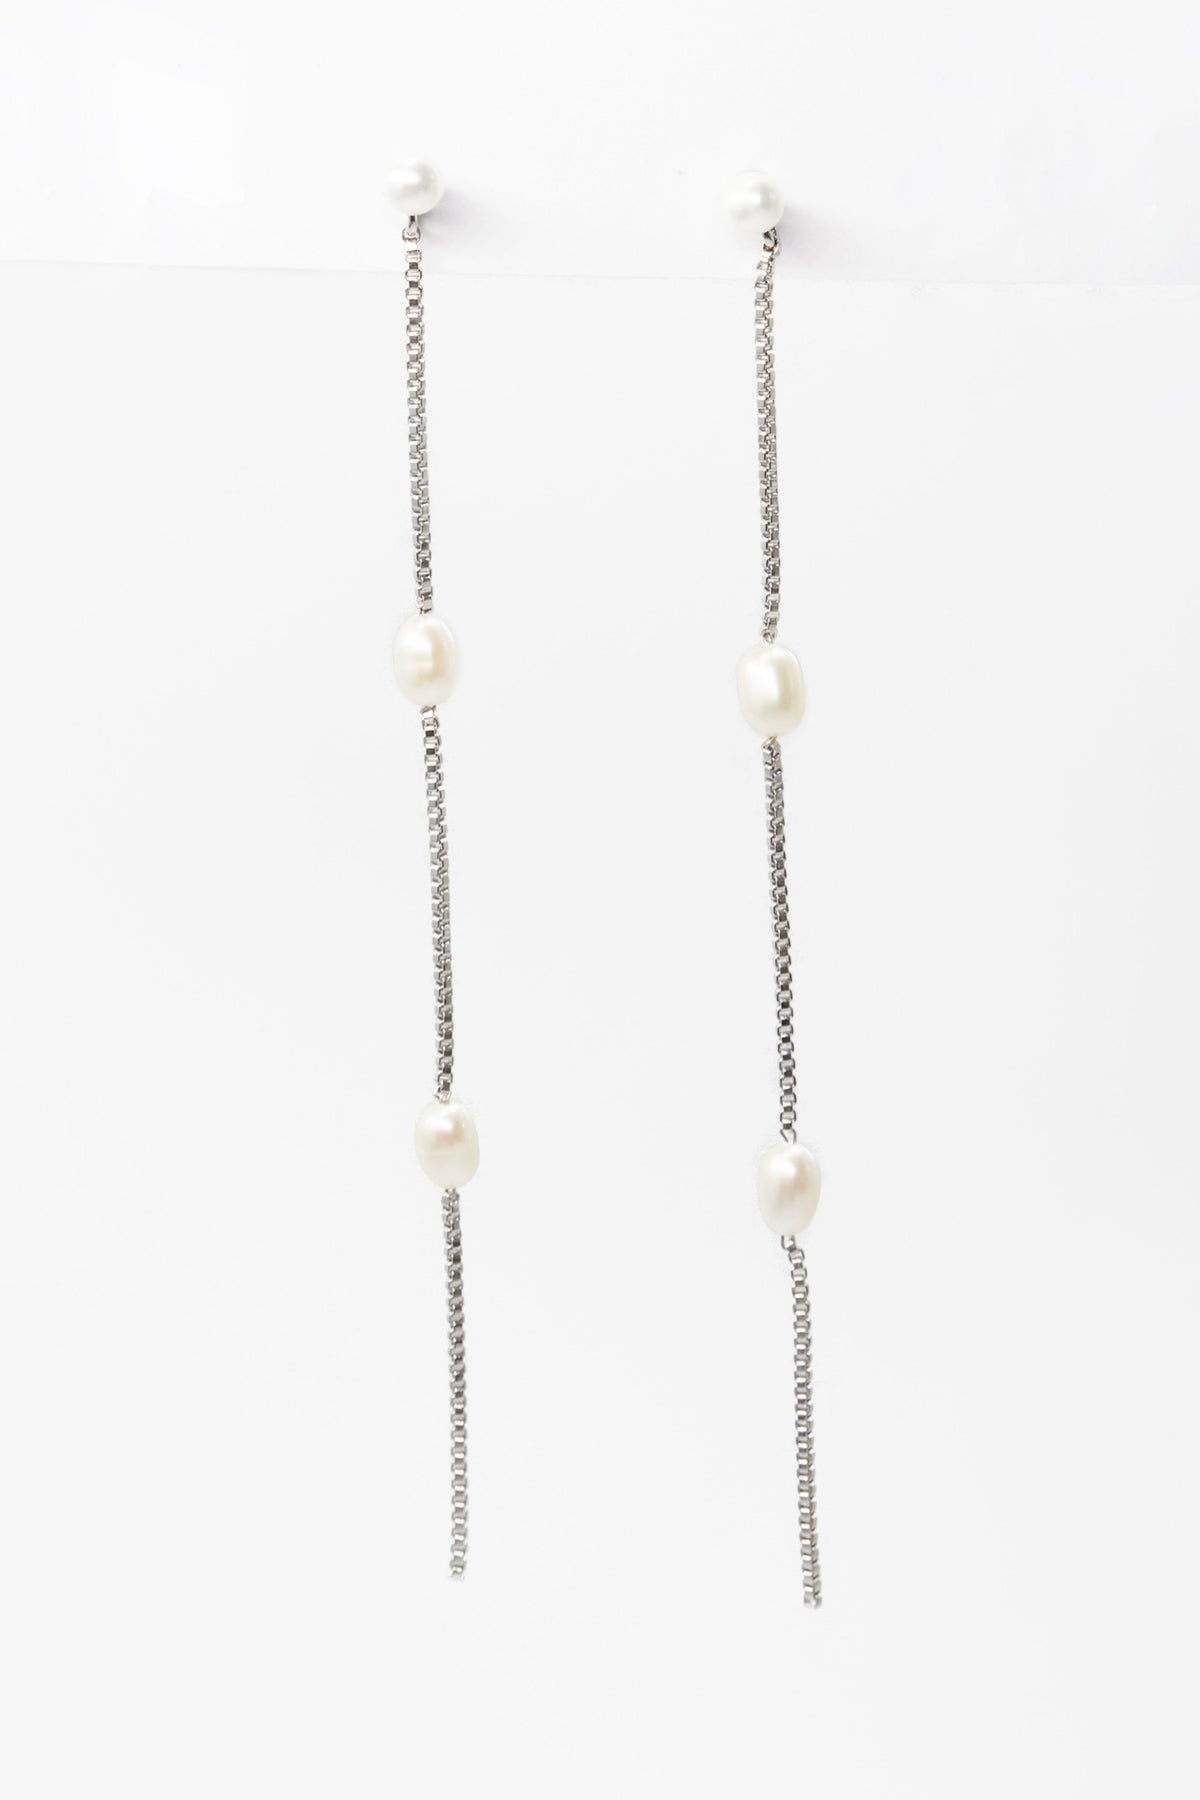 Silver Long Box Chain With Freshwater Pearls Earrings